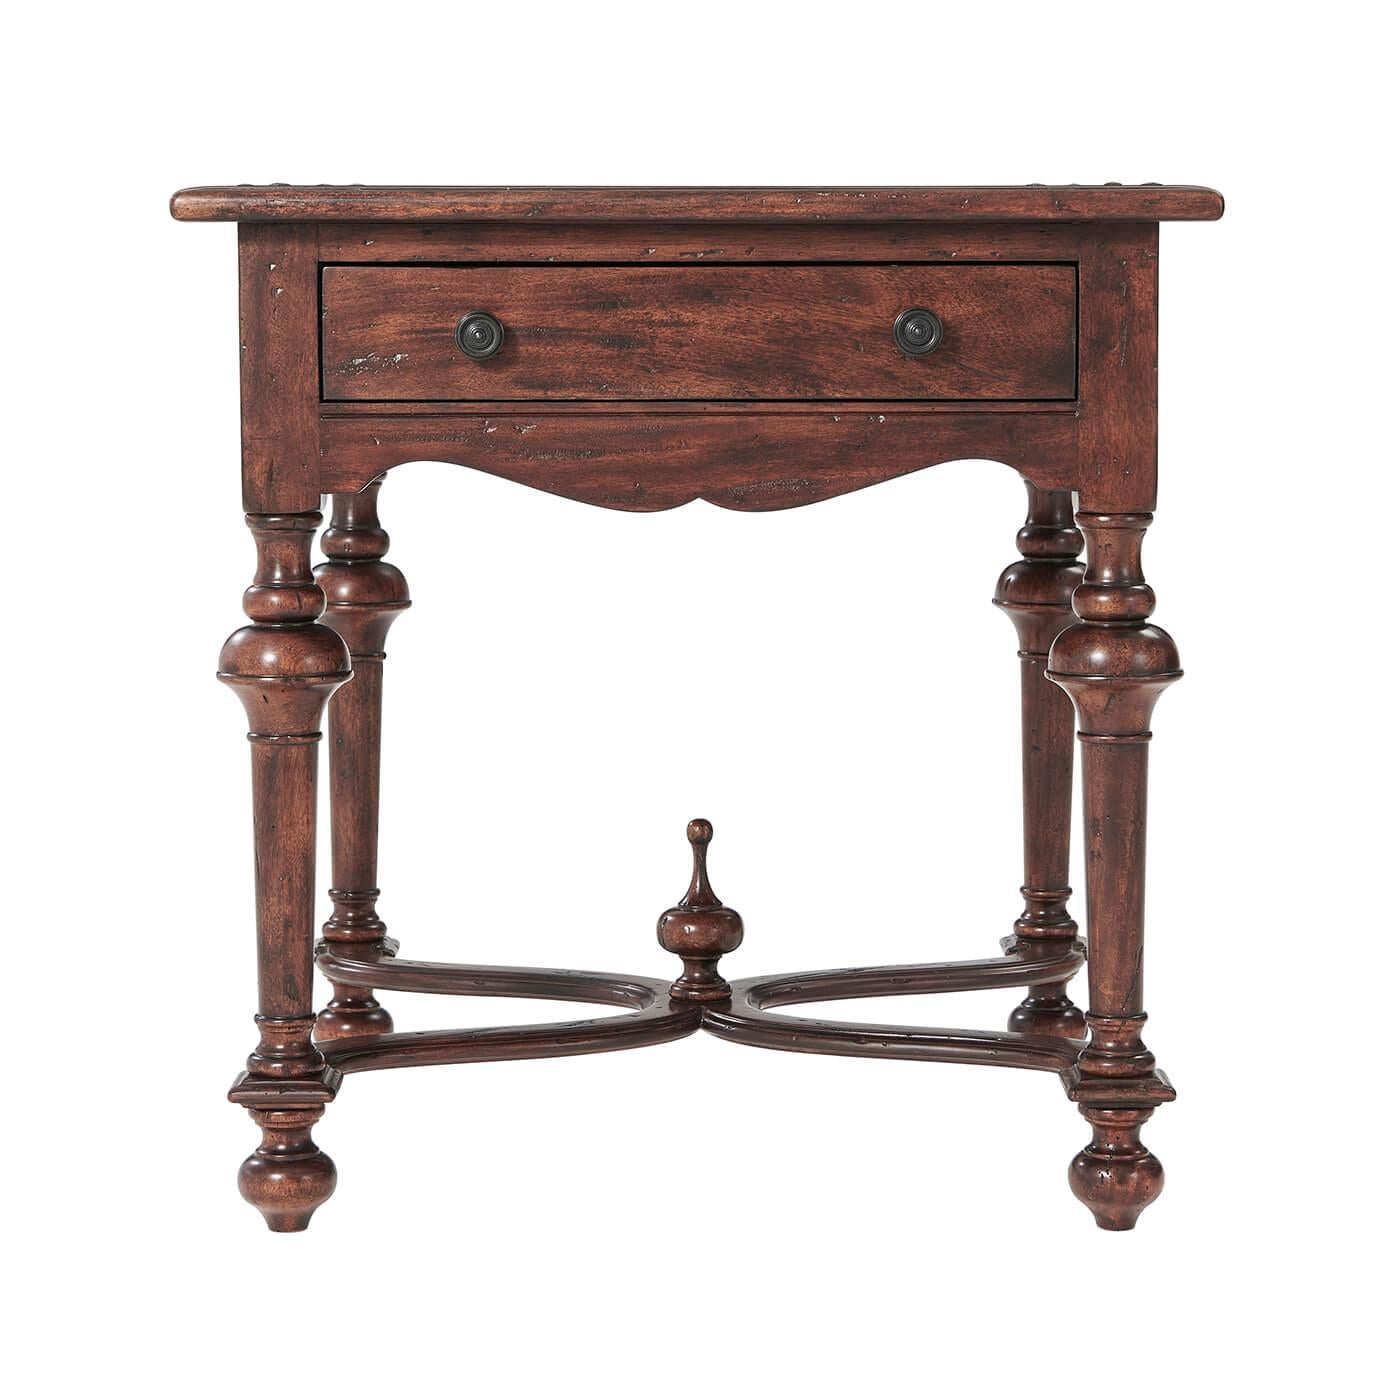 A William and Mary style antiqued wood end table, the square parquetry top above a drawer, and bell turned legs joined by a serpentine 'x' stretcher. 

Dimensions: 26